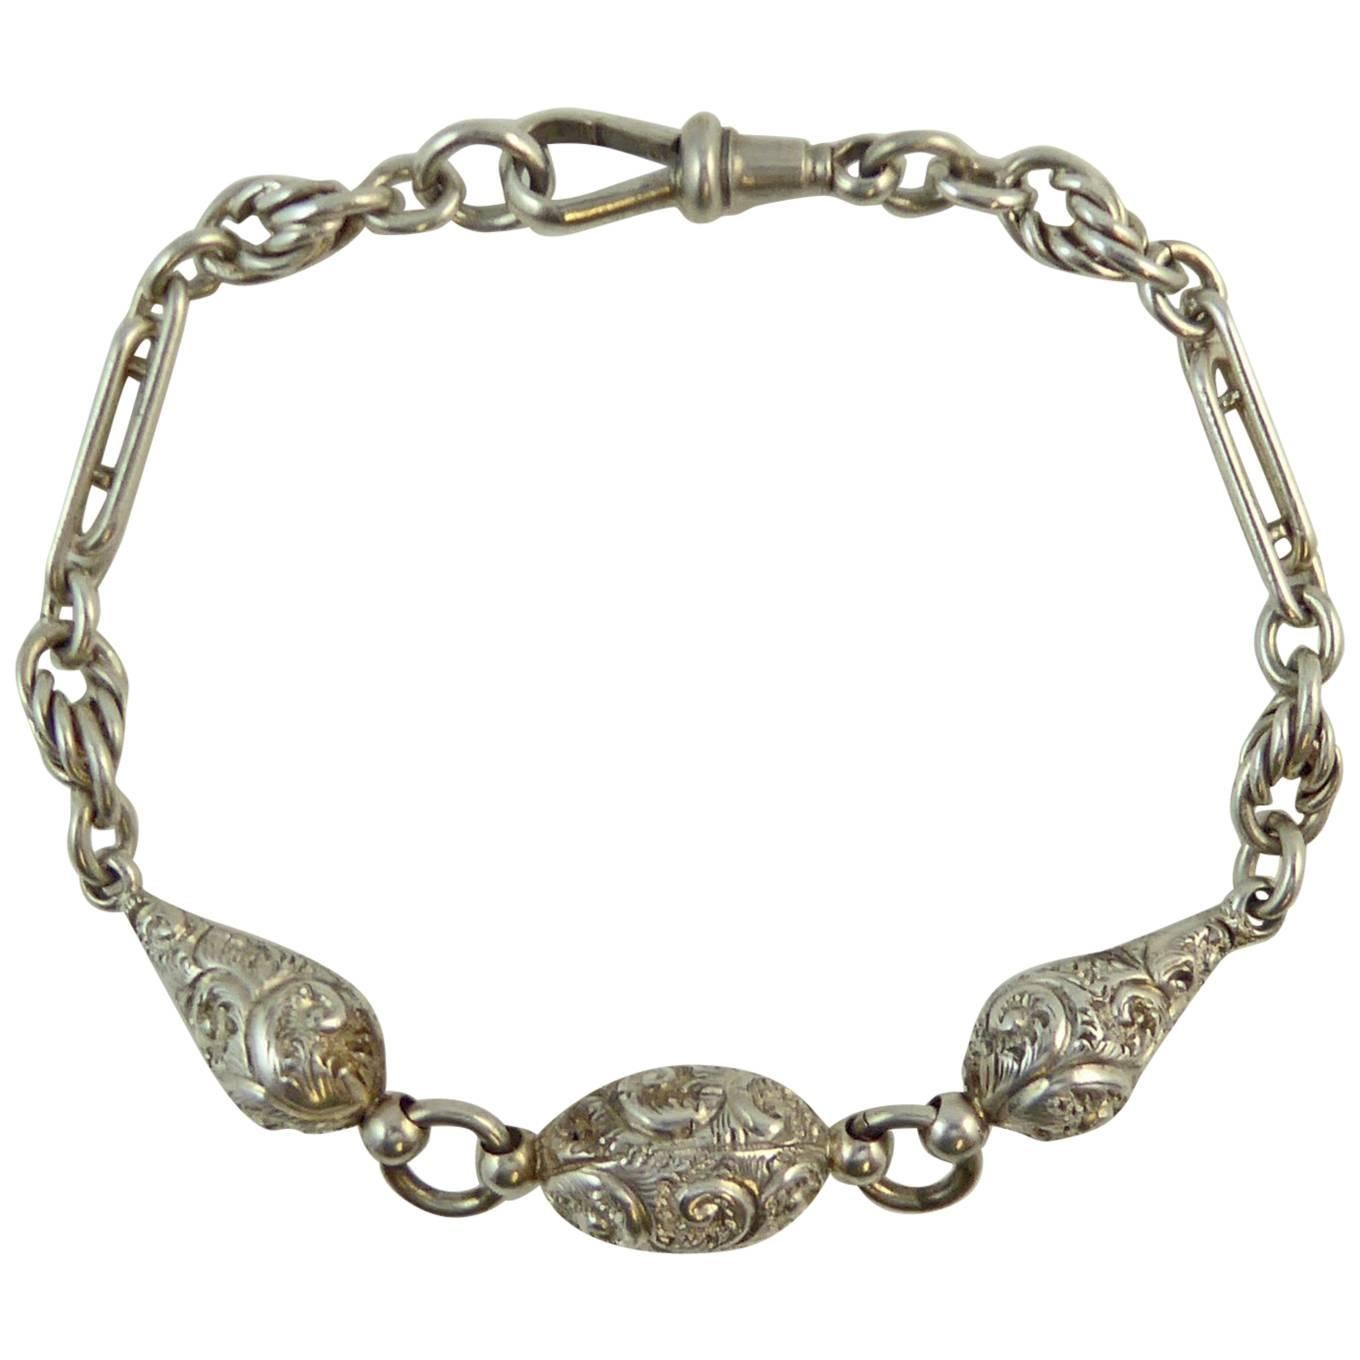 Victorian Fancy Silver Albertina Bracelet, Hand Engraved, Knot and Trombone Link